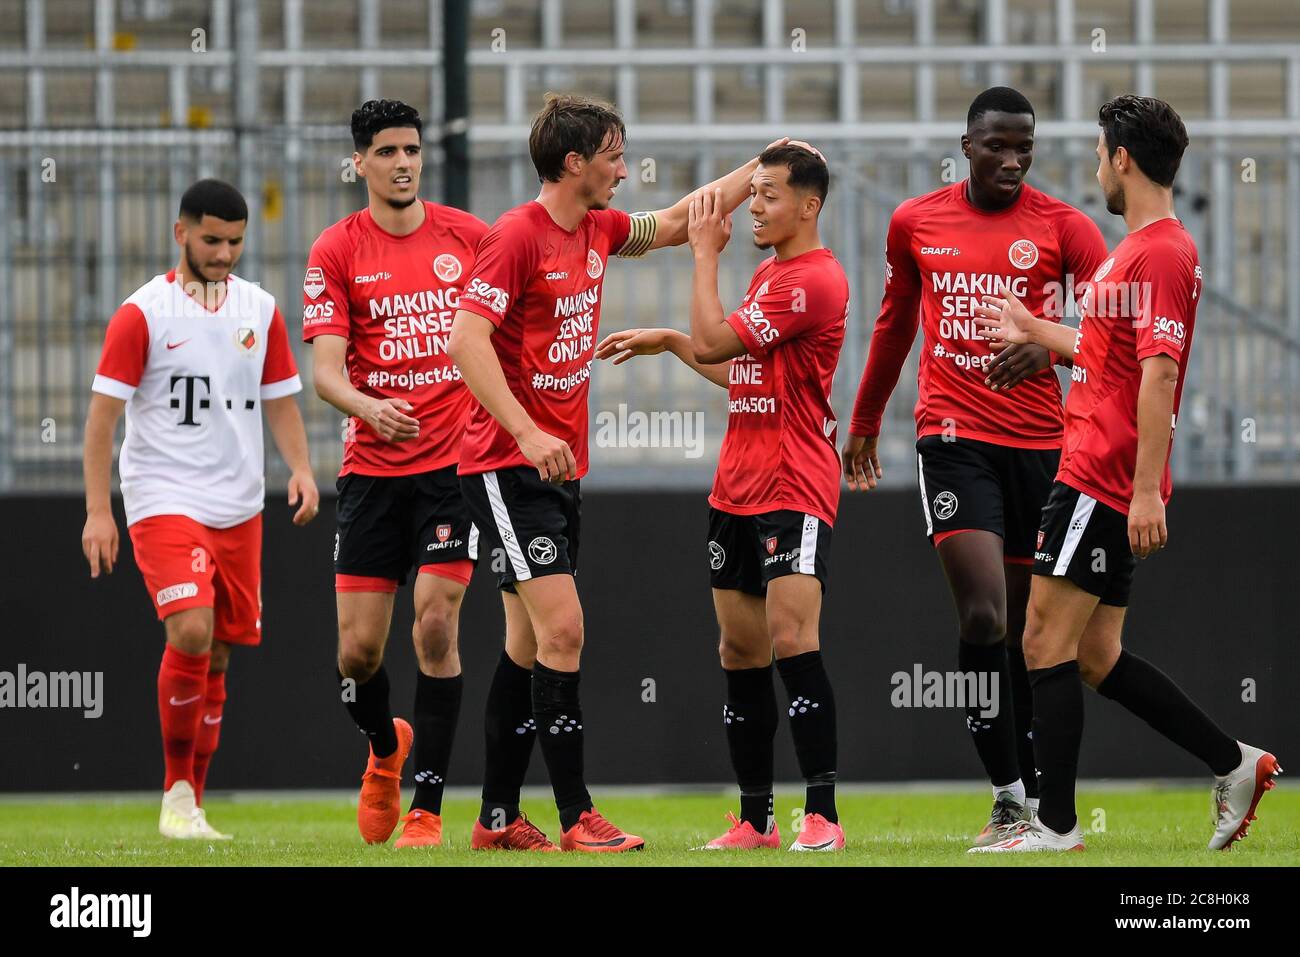 ALMERE, NETHERLANDS - JULY 24: Almere City FC celebrate the goal of Illias  Alhaft (3r) of Almere City FC seen during the pre season match Almere City  FC v Jong FC Utrecht